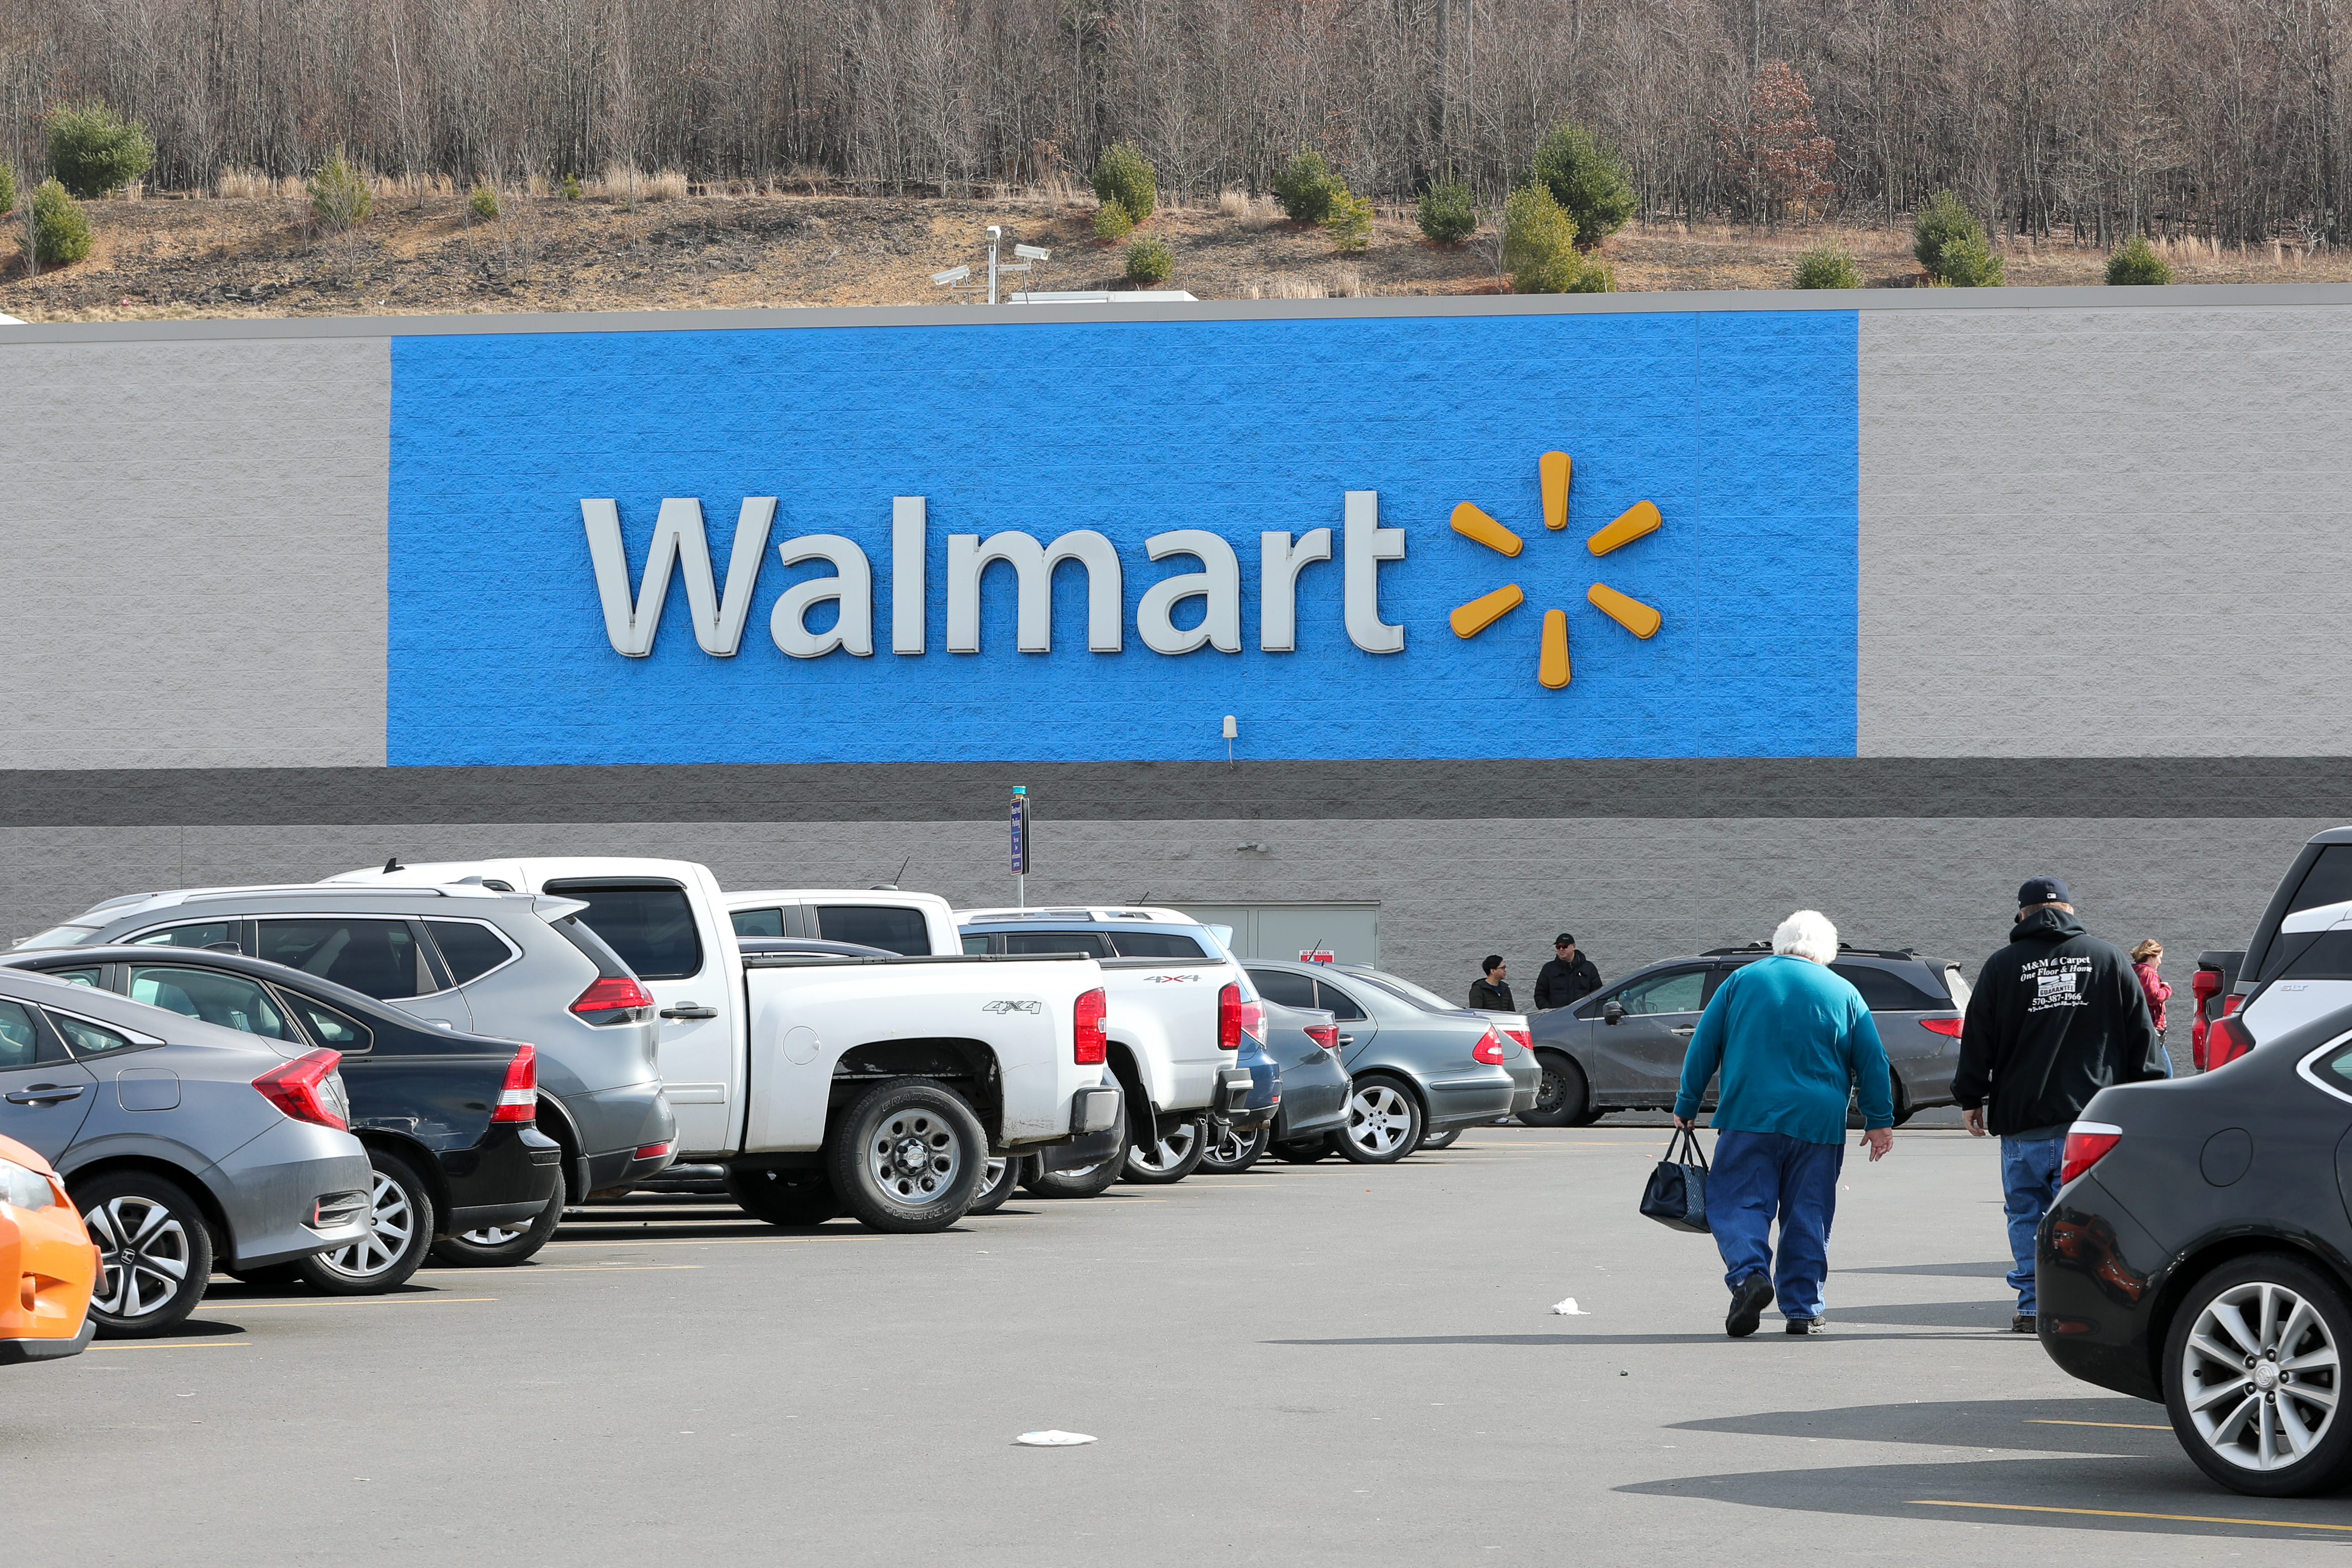 Walmart in Forest Park will close permanently in April